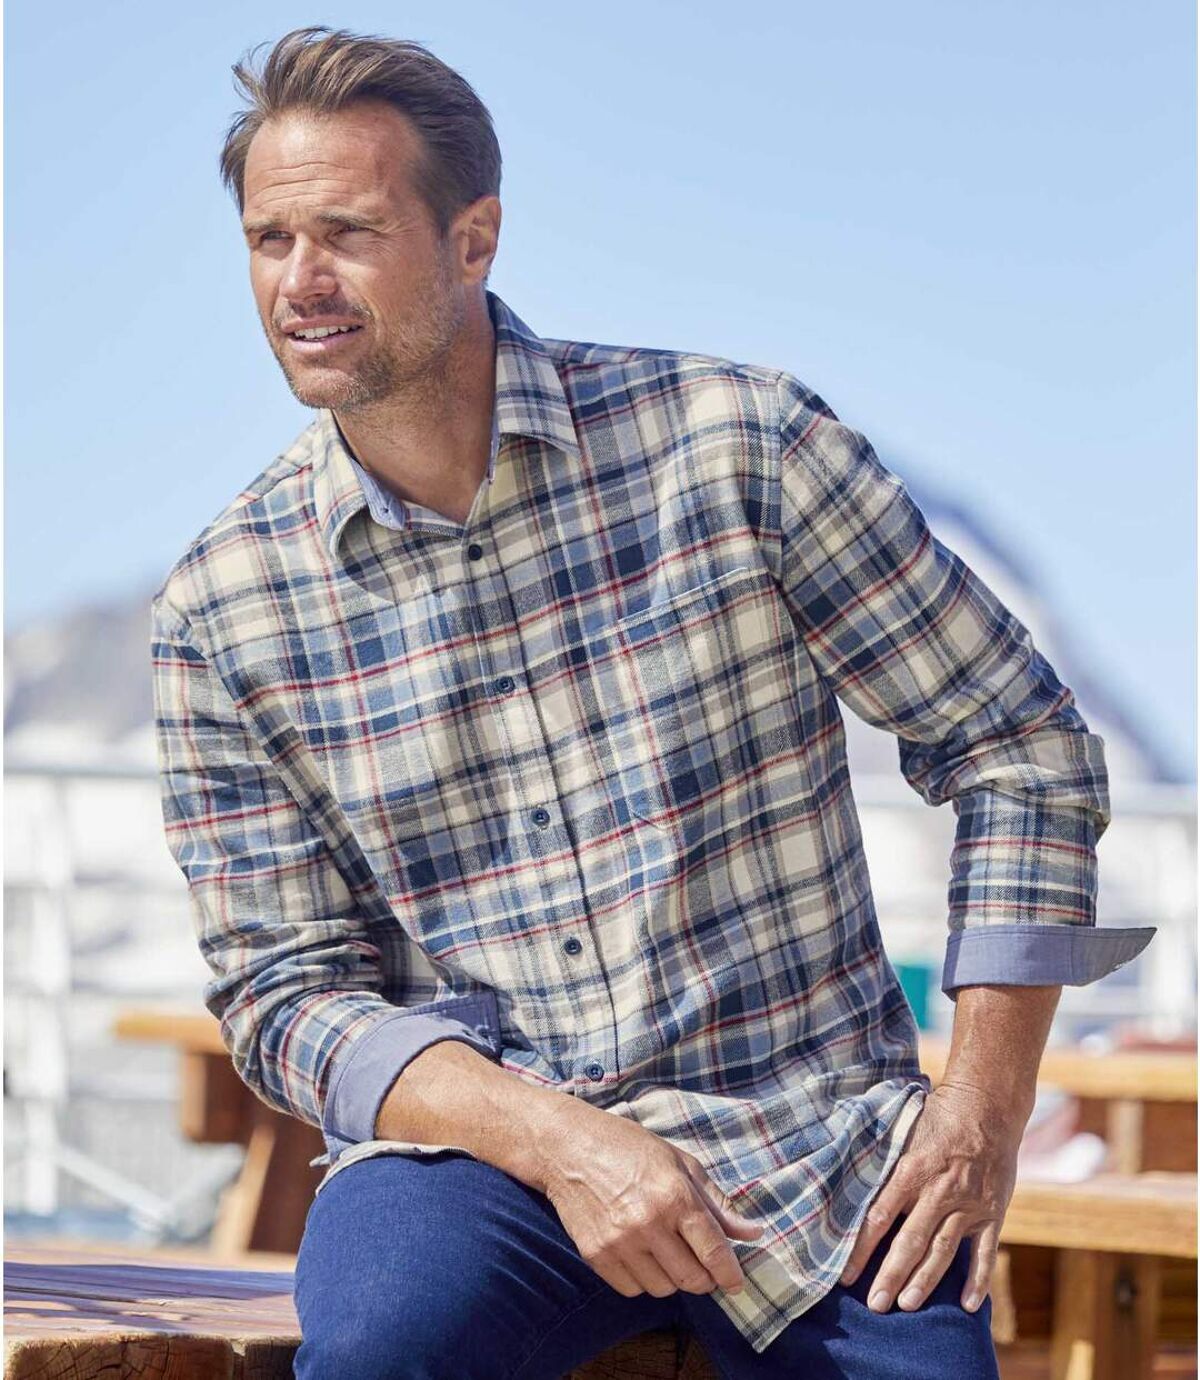 Men's Checked Flannel Shirt with Chambray Details - Blue Ecru Atlas For Men